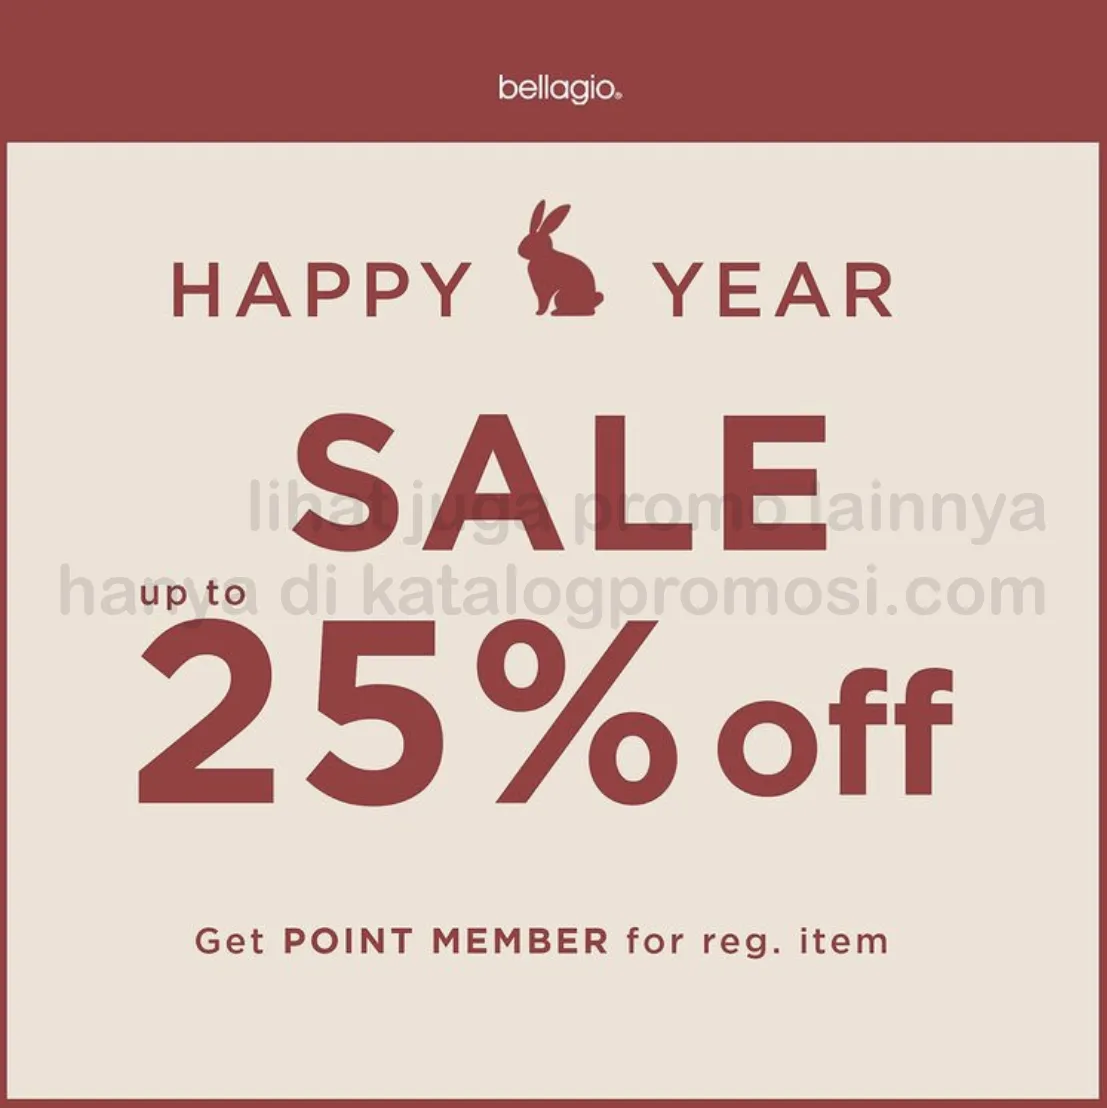 Promo BELLAGIO CHINESE NEW YEAR SALE - DISCOUNT up to 25% off